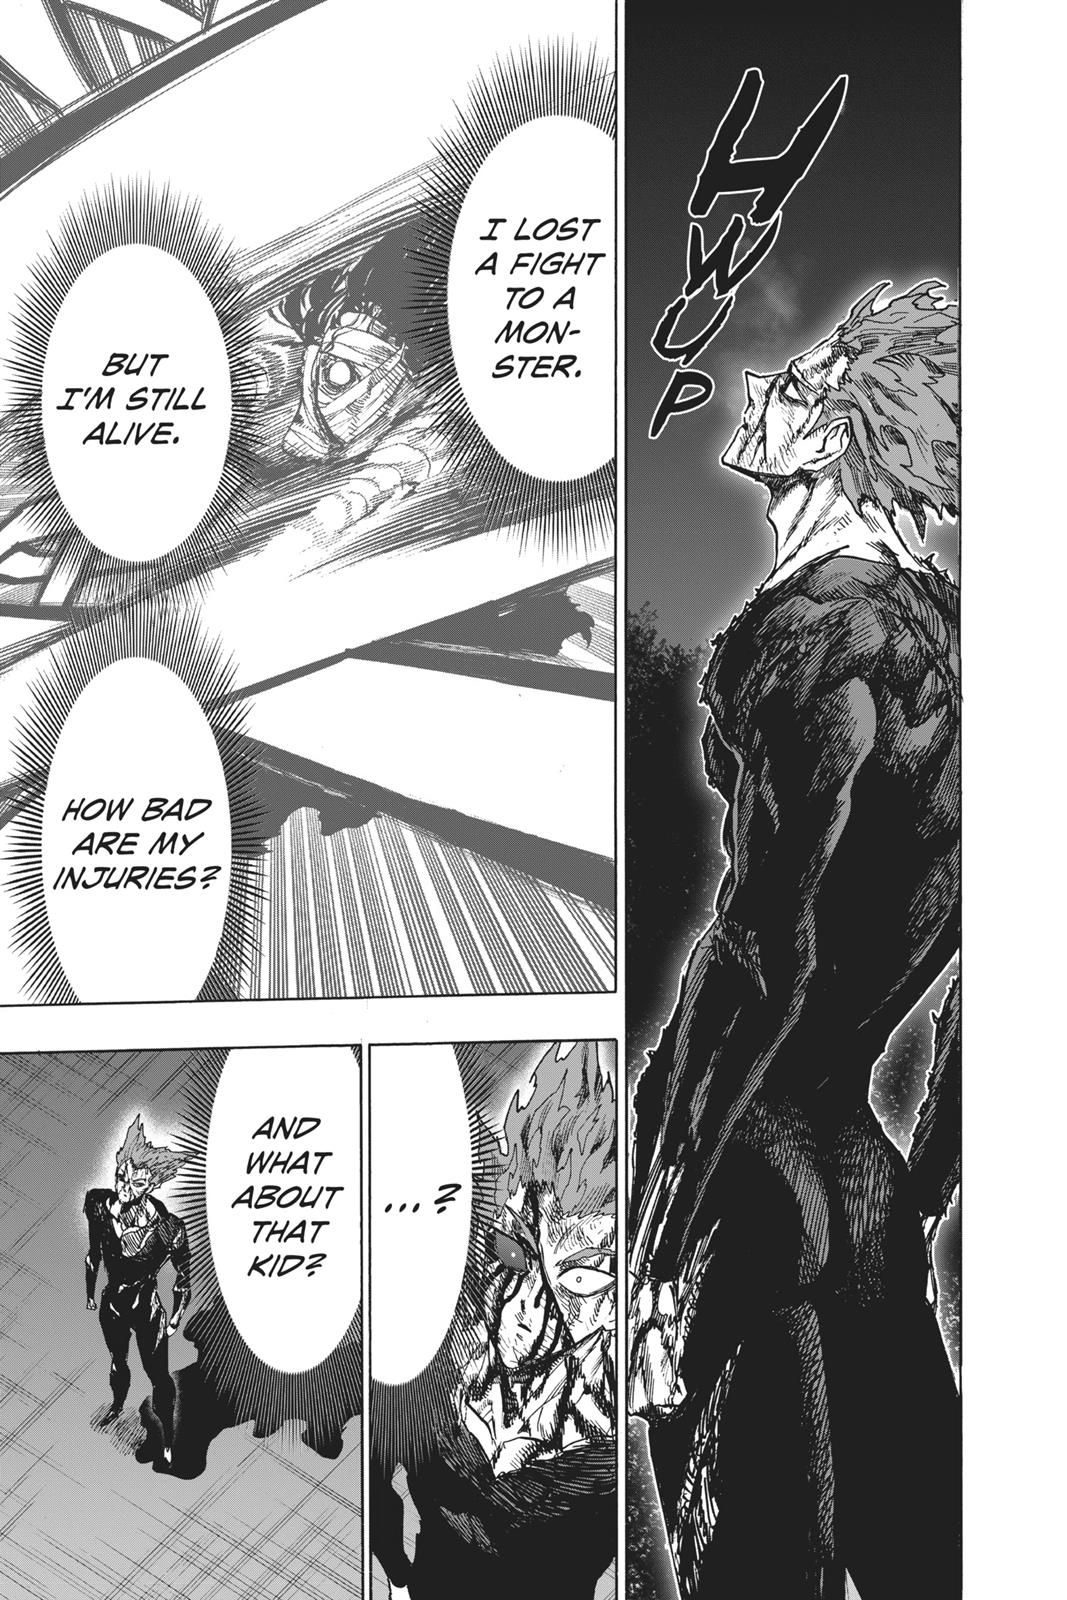 One-Punch Man, Punch 90 image 73